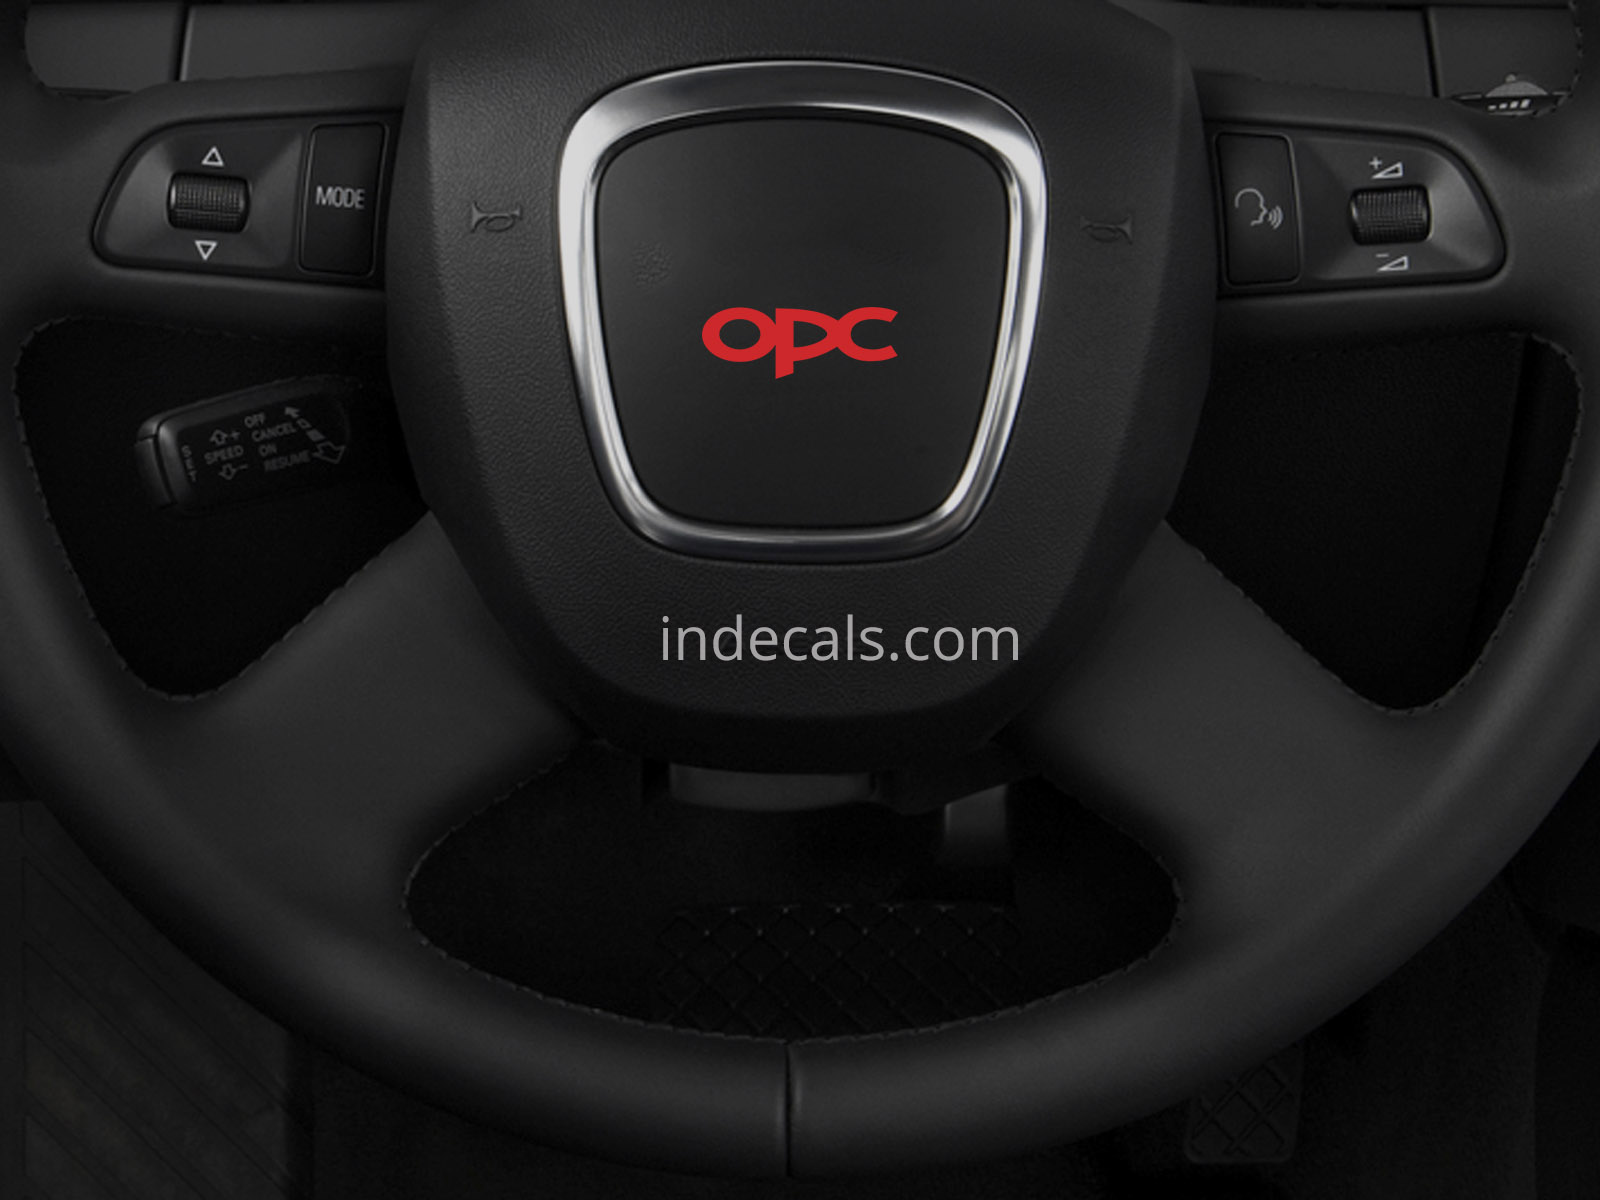 3 x Opel OPC Stickers for Steering Wheel - Red